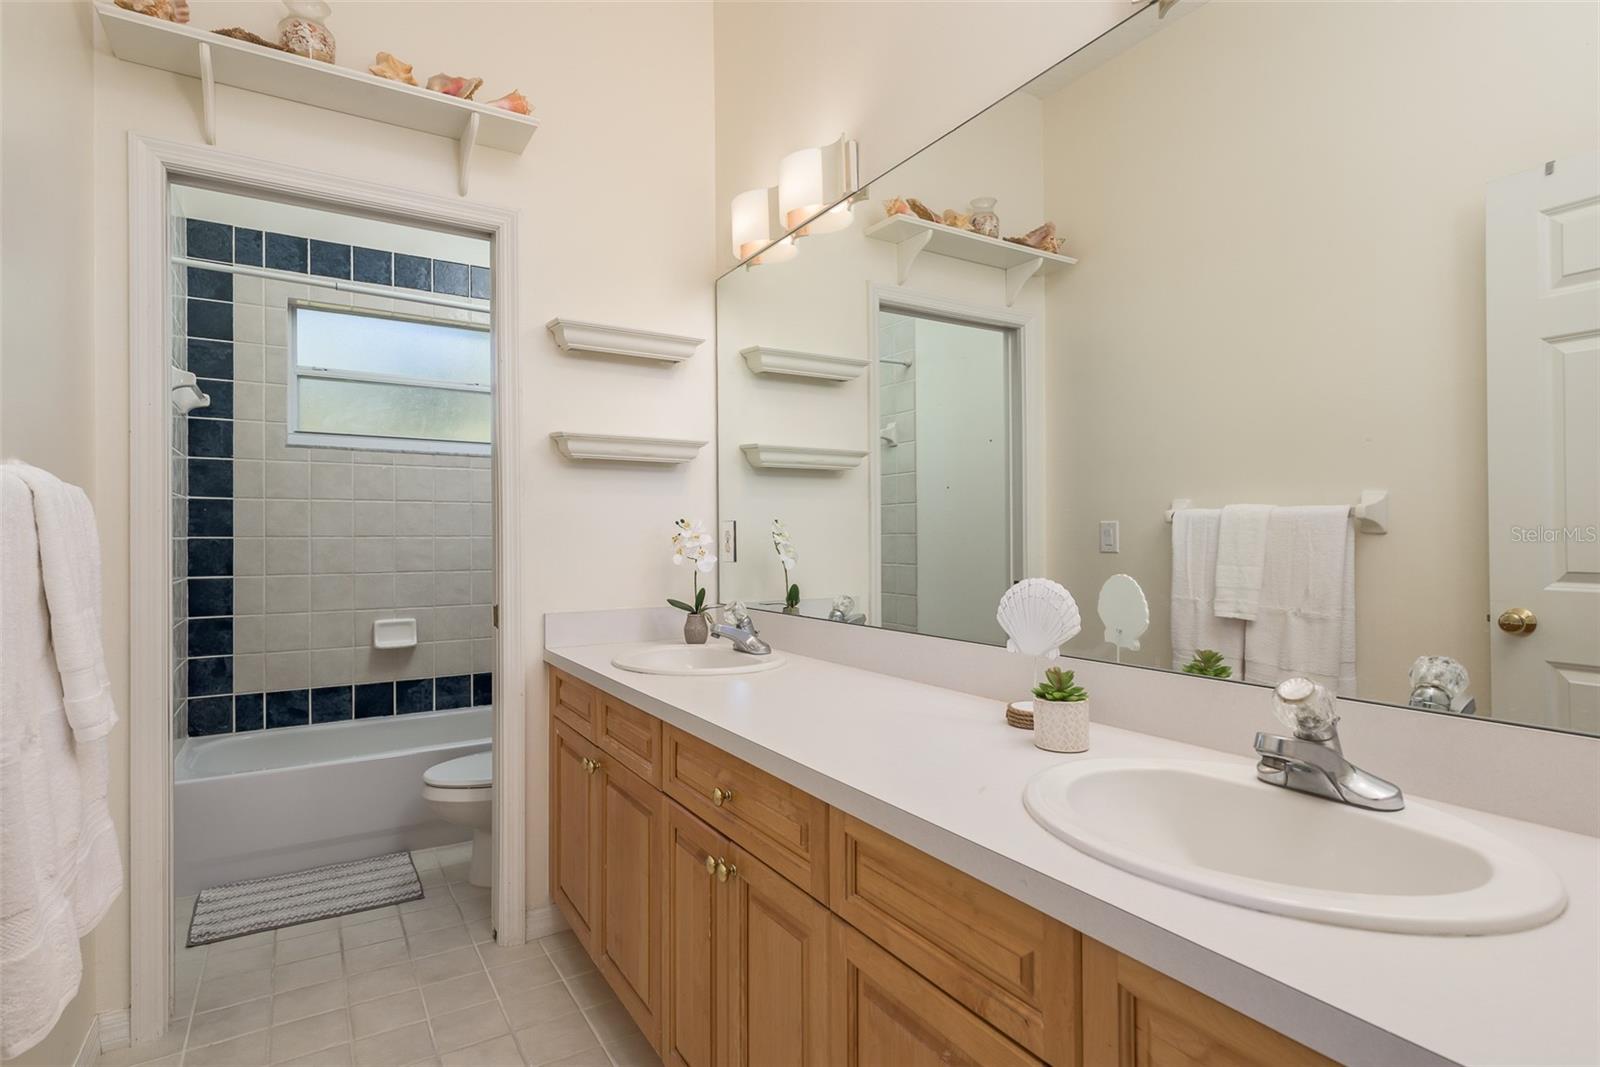 Bathroom 2 impresses with its generous size and practicality, featuring a spacious layout and dual vanity sinks, providing ample countertop space and storage for everyday essentials, ensuring convenience and comfort for all occupants.